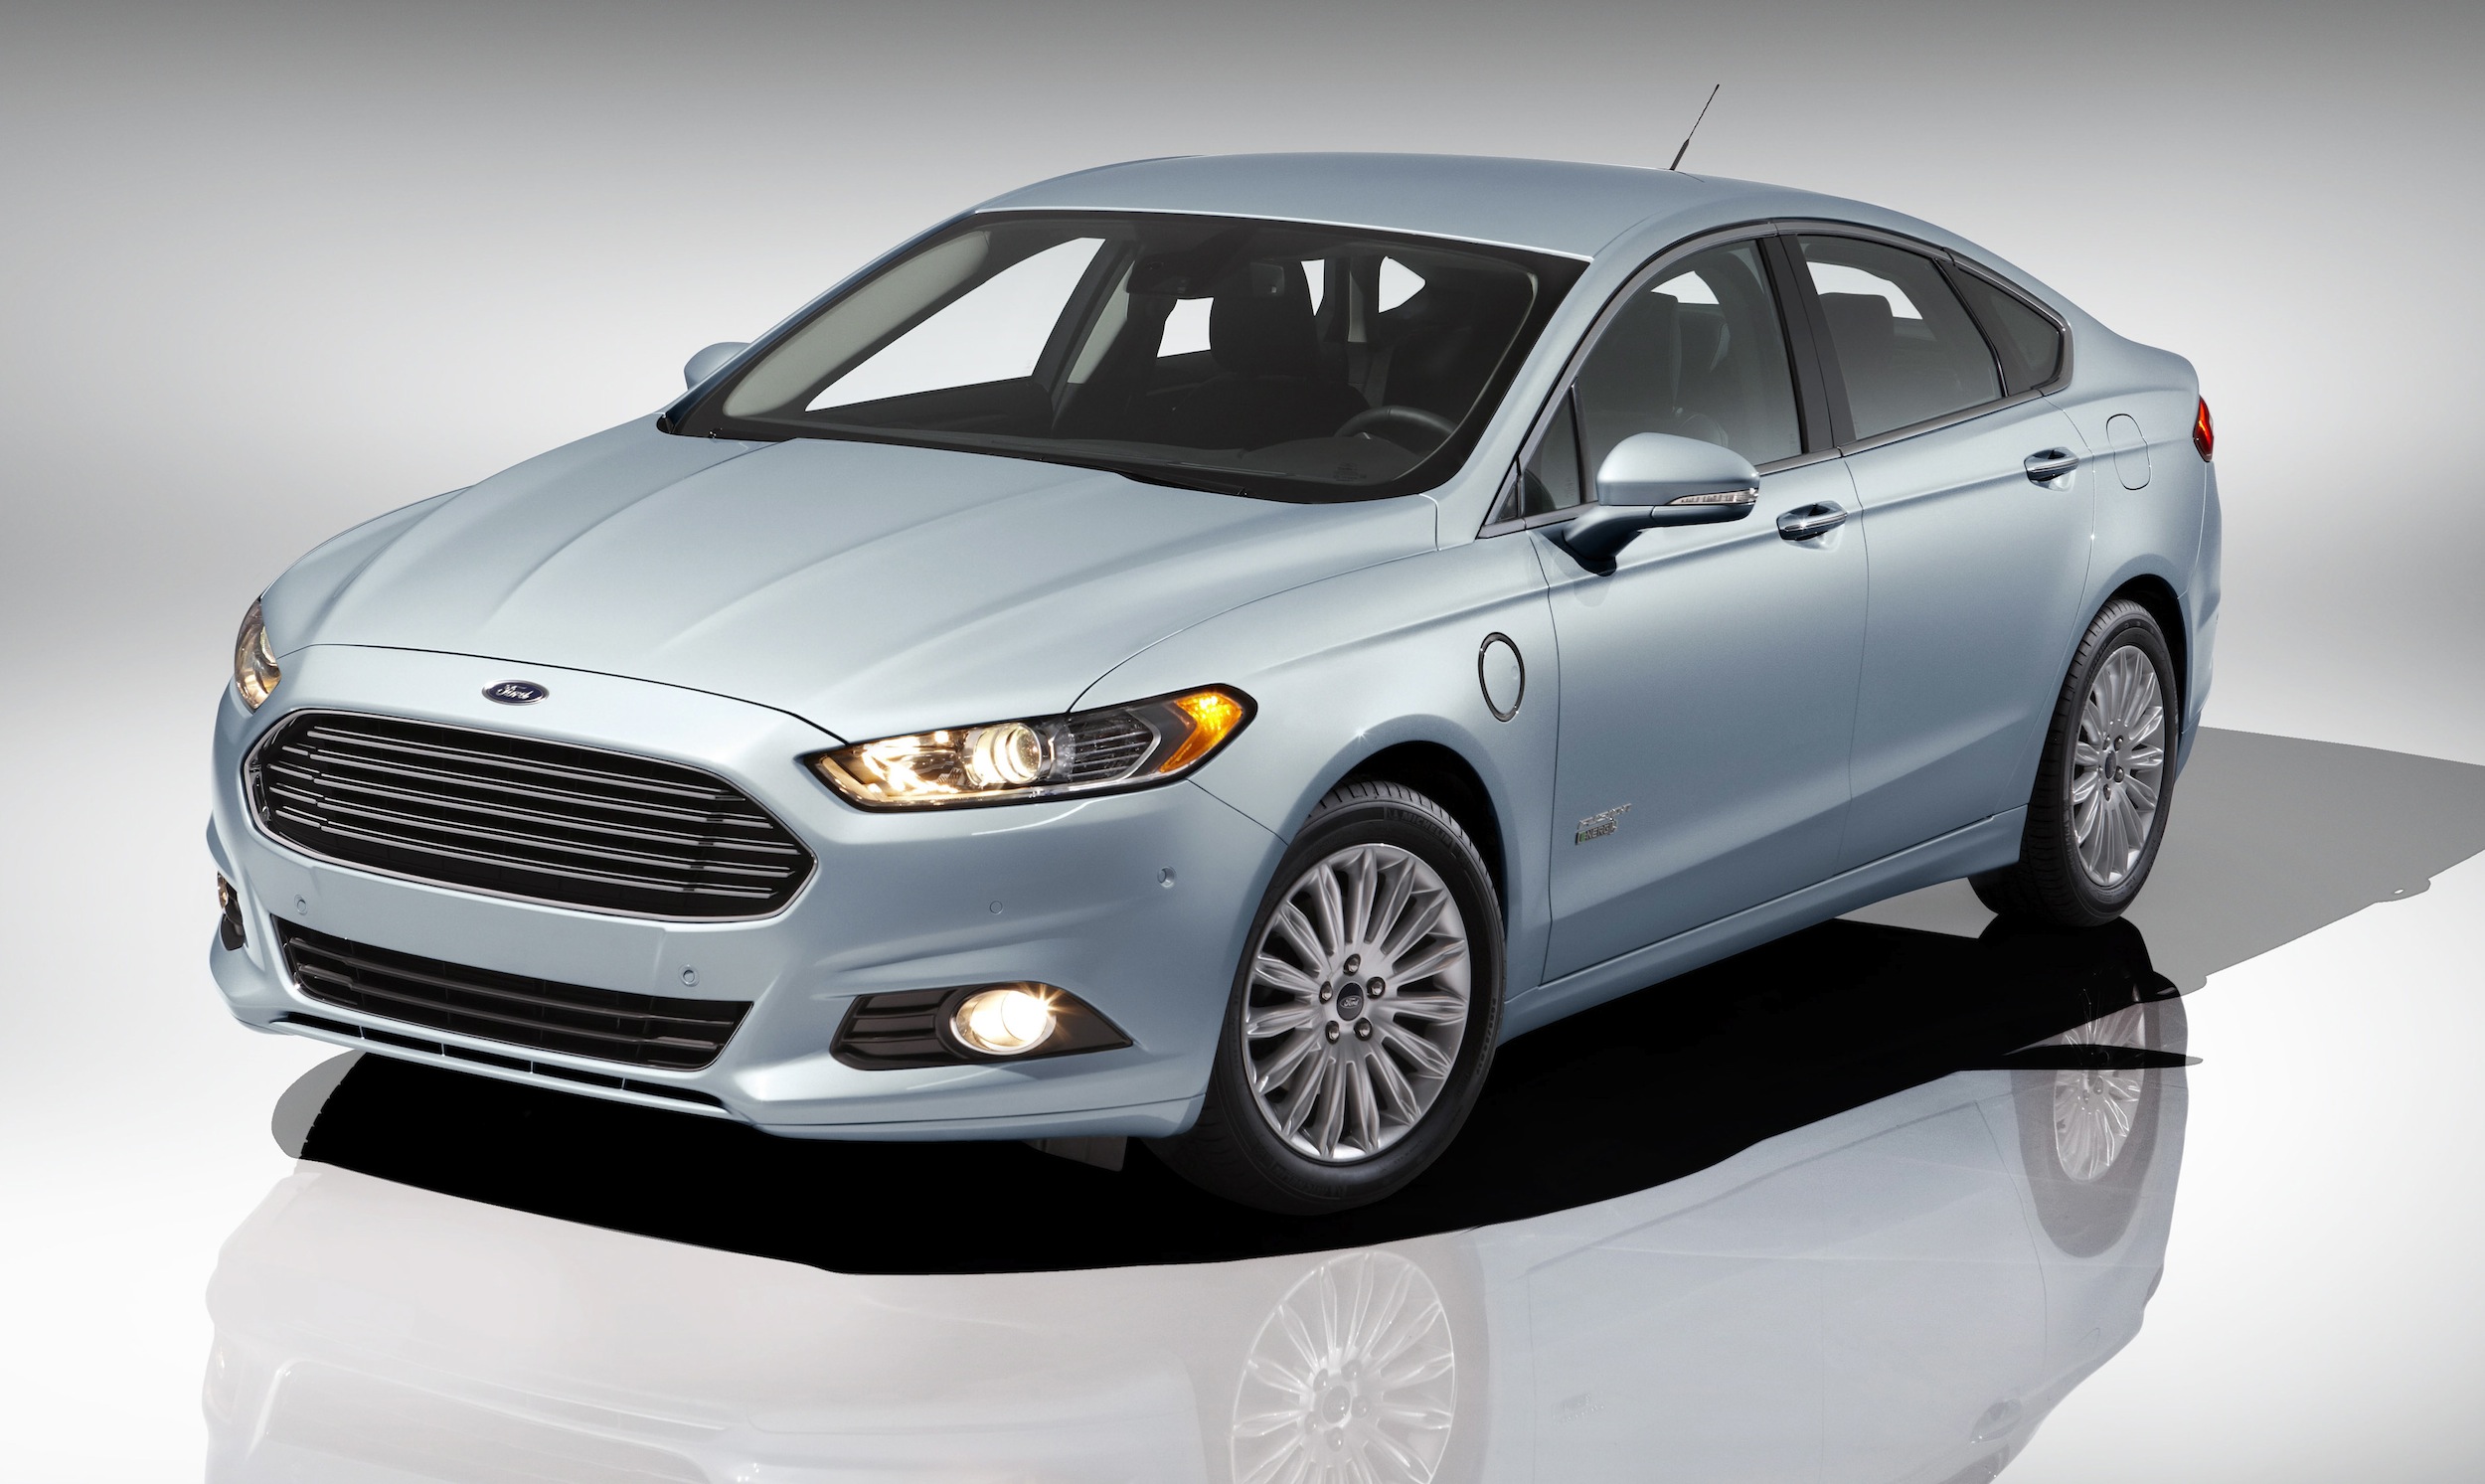 2013 Ford Fusion Energi: 21 Miles Of Electric Range From Plug-In Hybrid